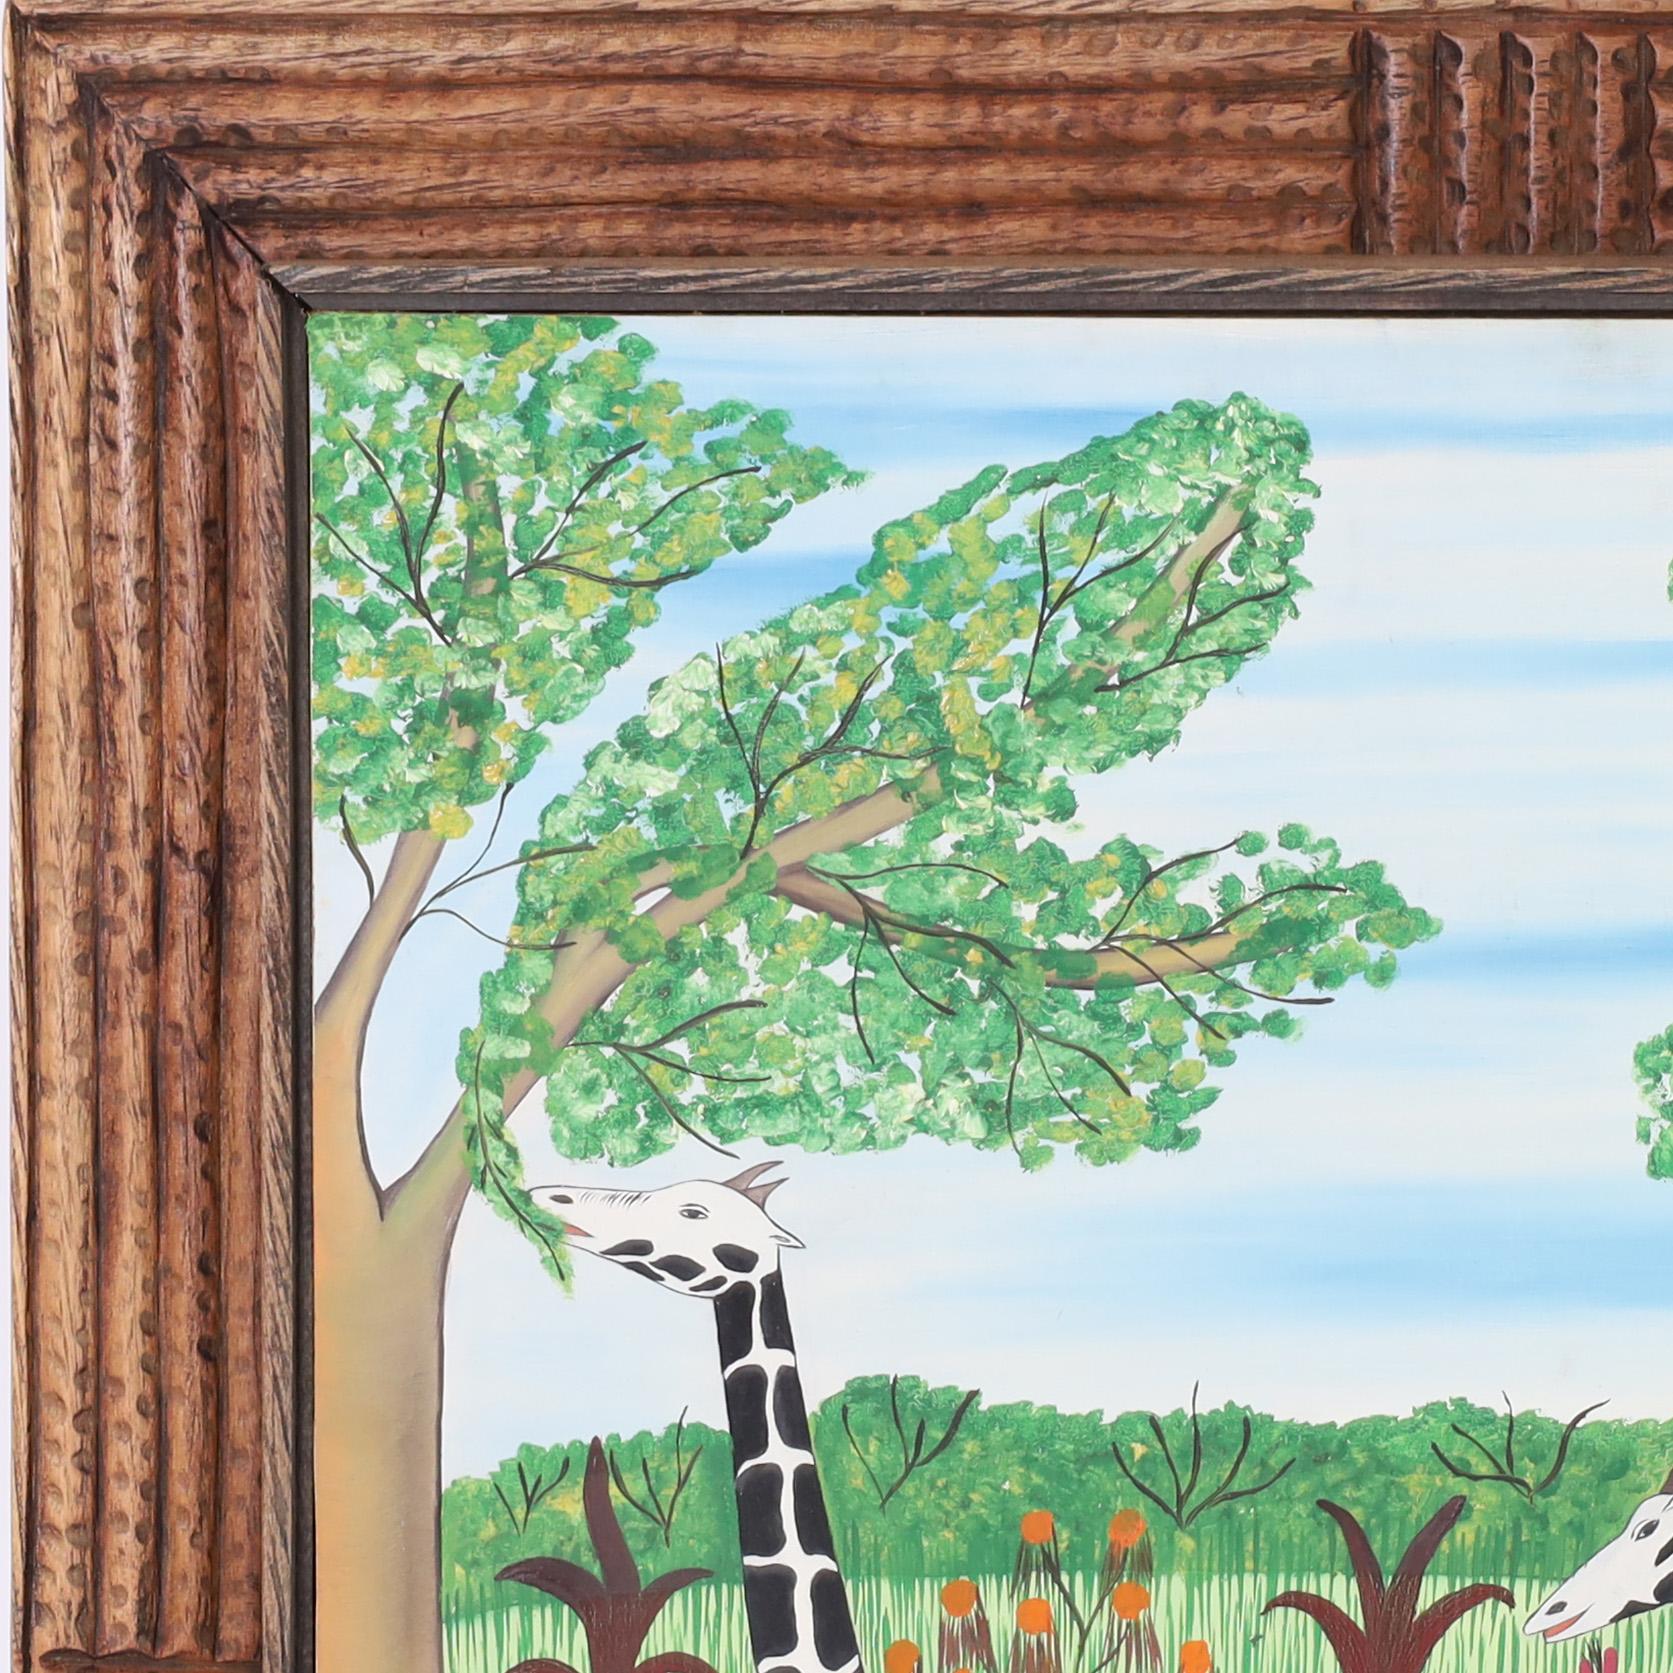 Striking vintage acrylic painting on board of two giraffes in a landscape with flowers and trees executed in a distinctive playful naive technique. Signed Fils Rigaud Benoit 74 and presented in the original carved wood frame.